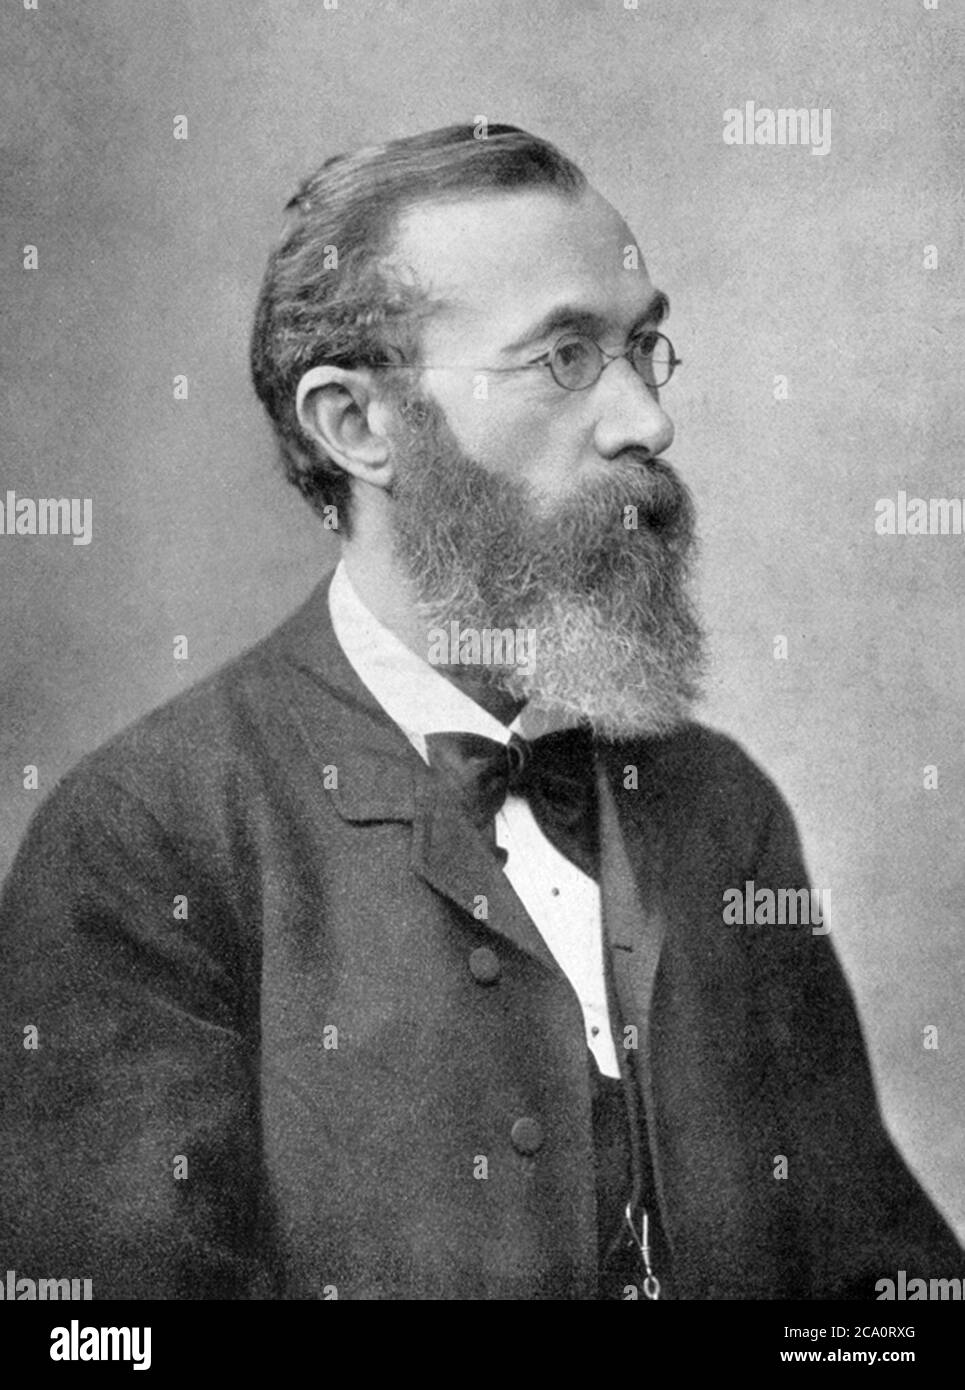 Wilhelm Maximilian Wundt (1832 – 1920) German physiologist, philosopher, and professor, known today as one of the founders of modern psychology. Stock Photo